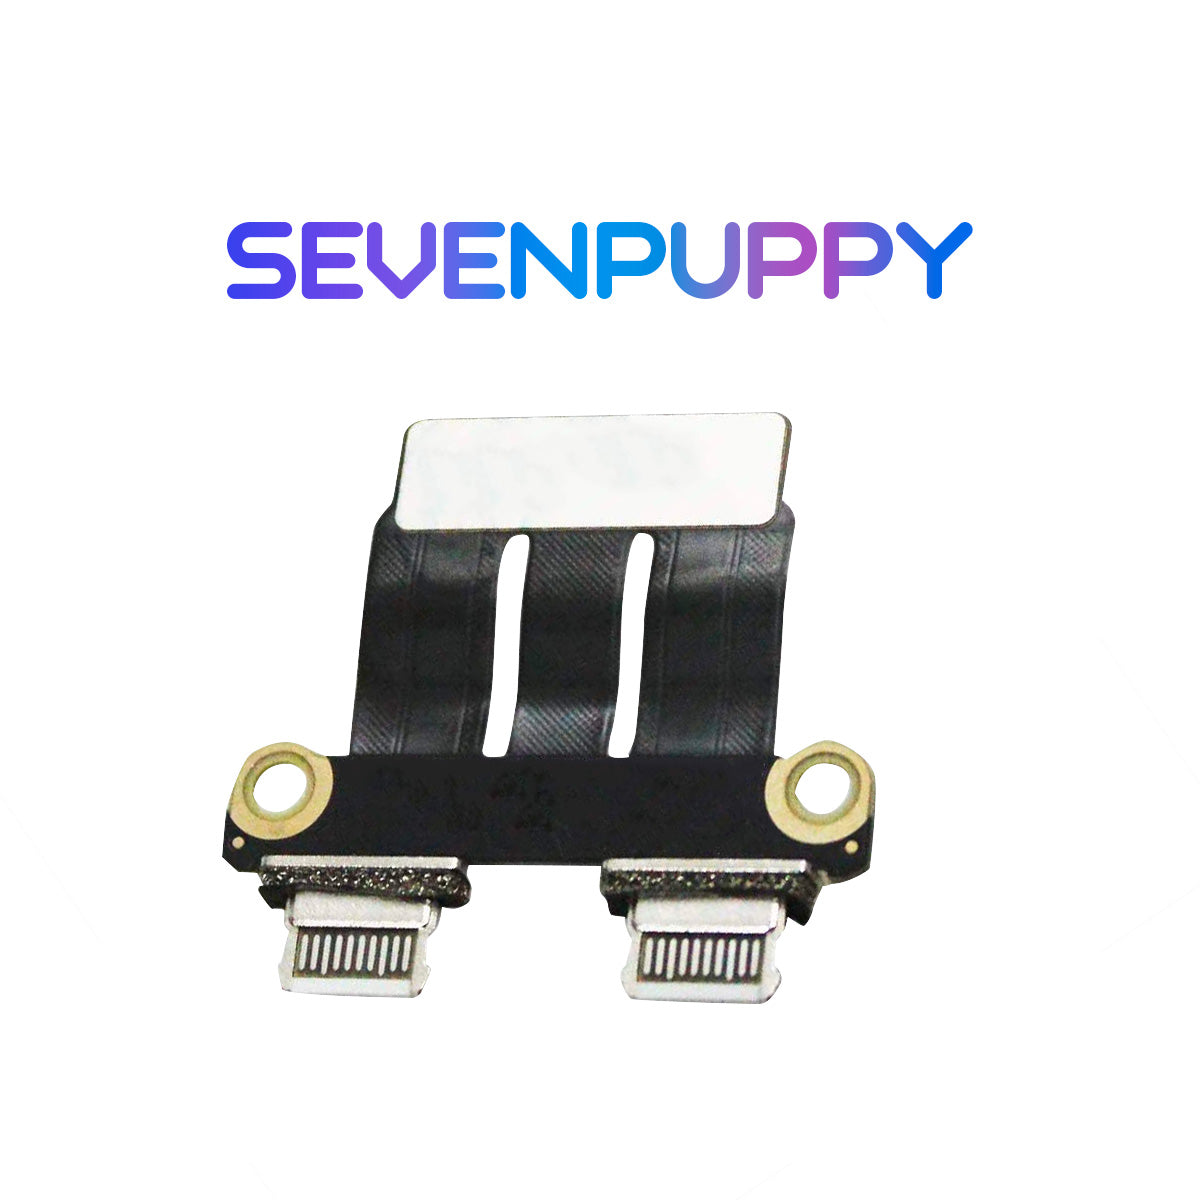 SEVEN PUPPY Brand NEW For Macbook Pro 13" A2338 2020 Year Charging Port Power DC Jack I/O USB Audio Board